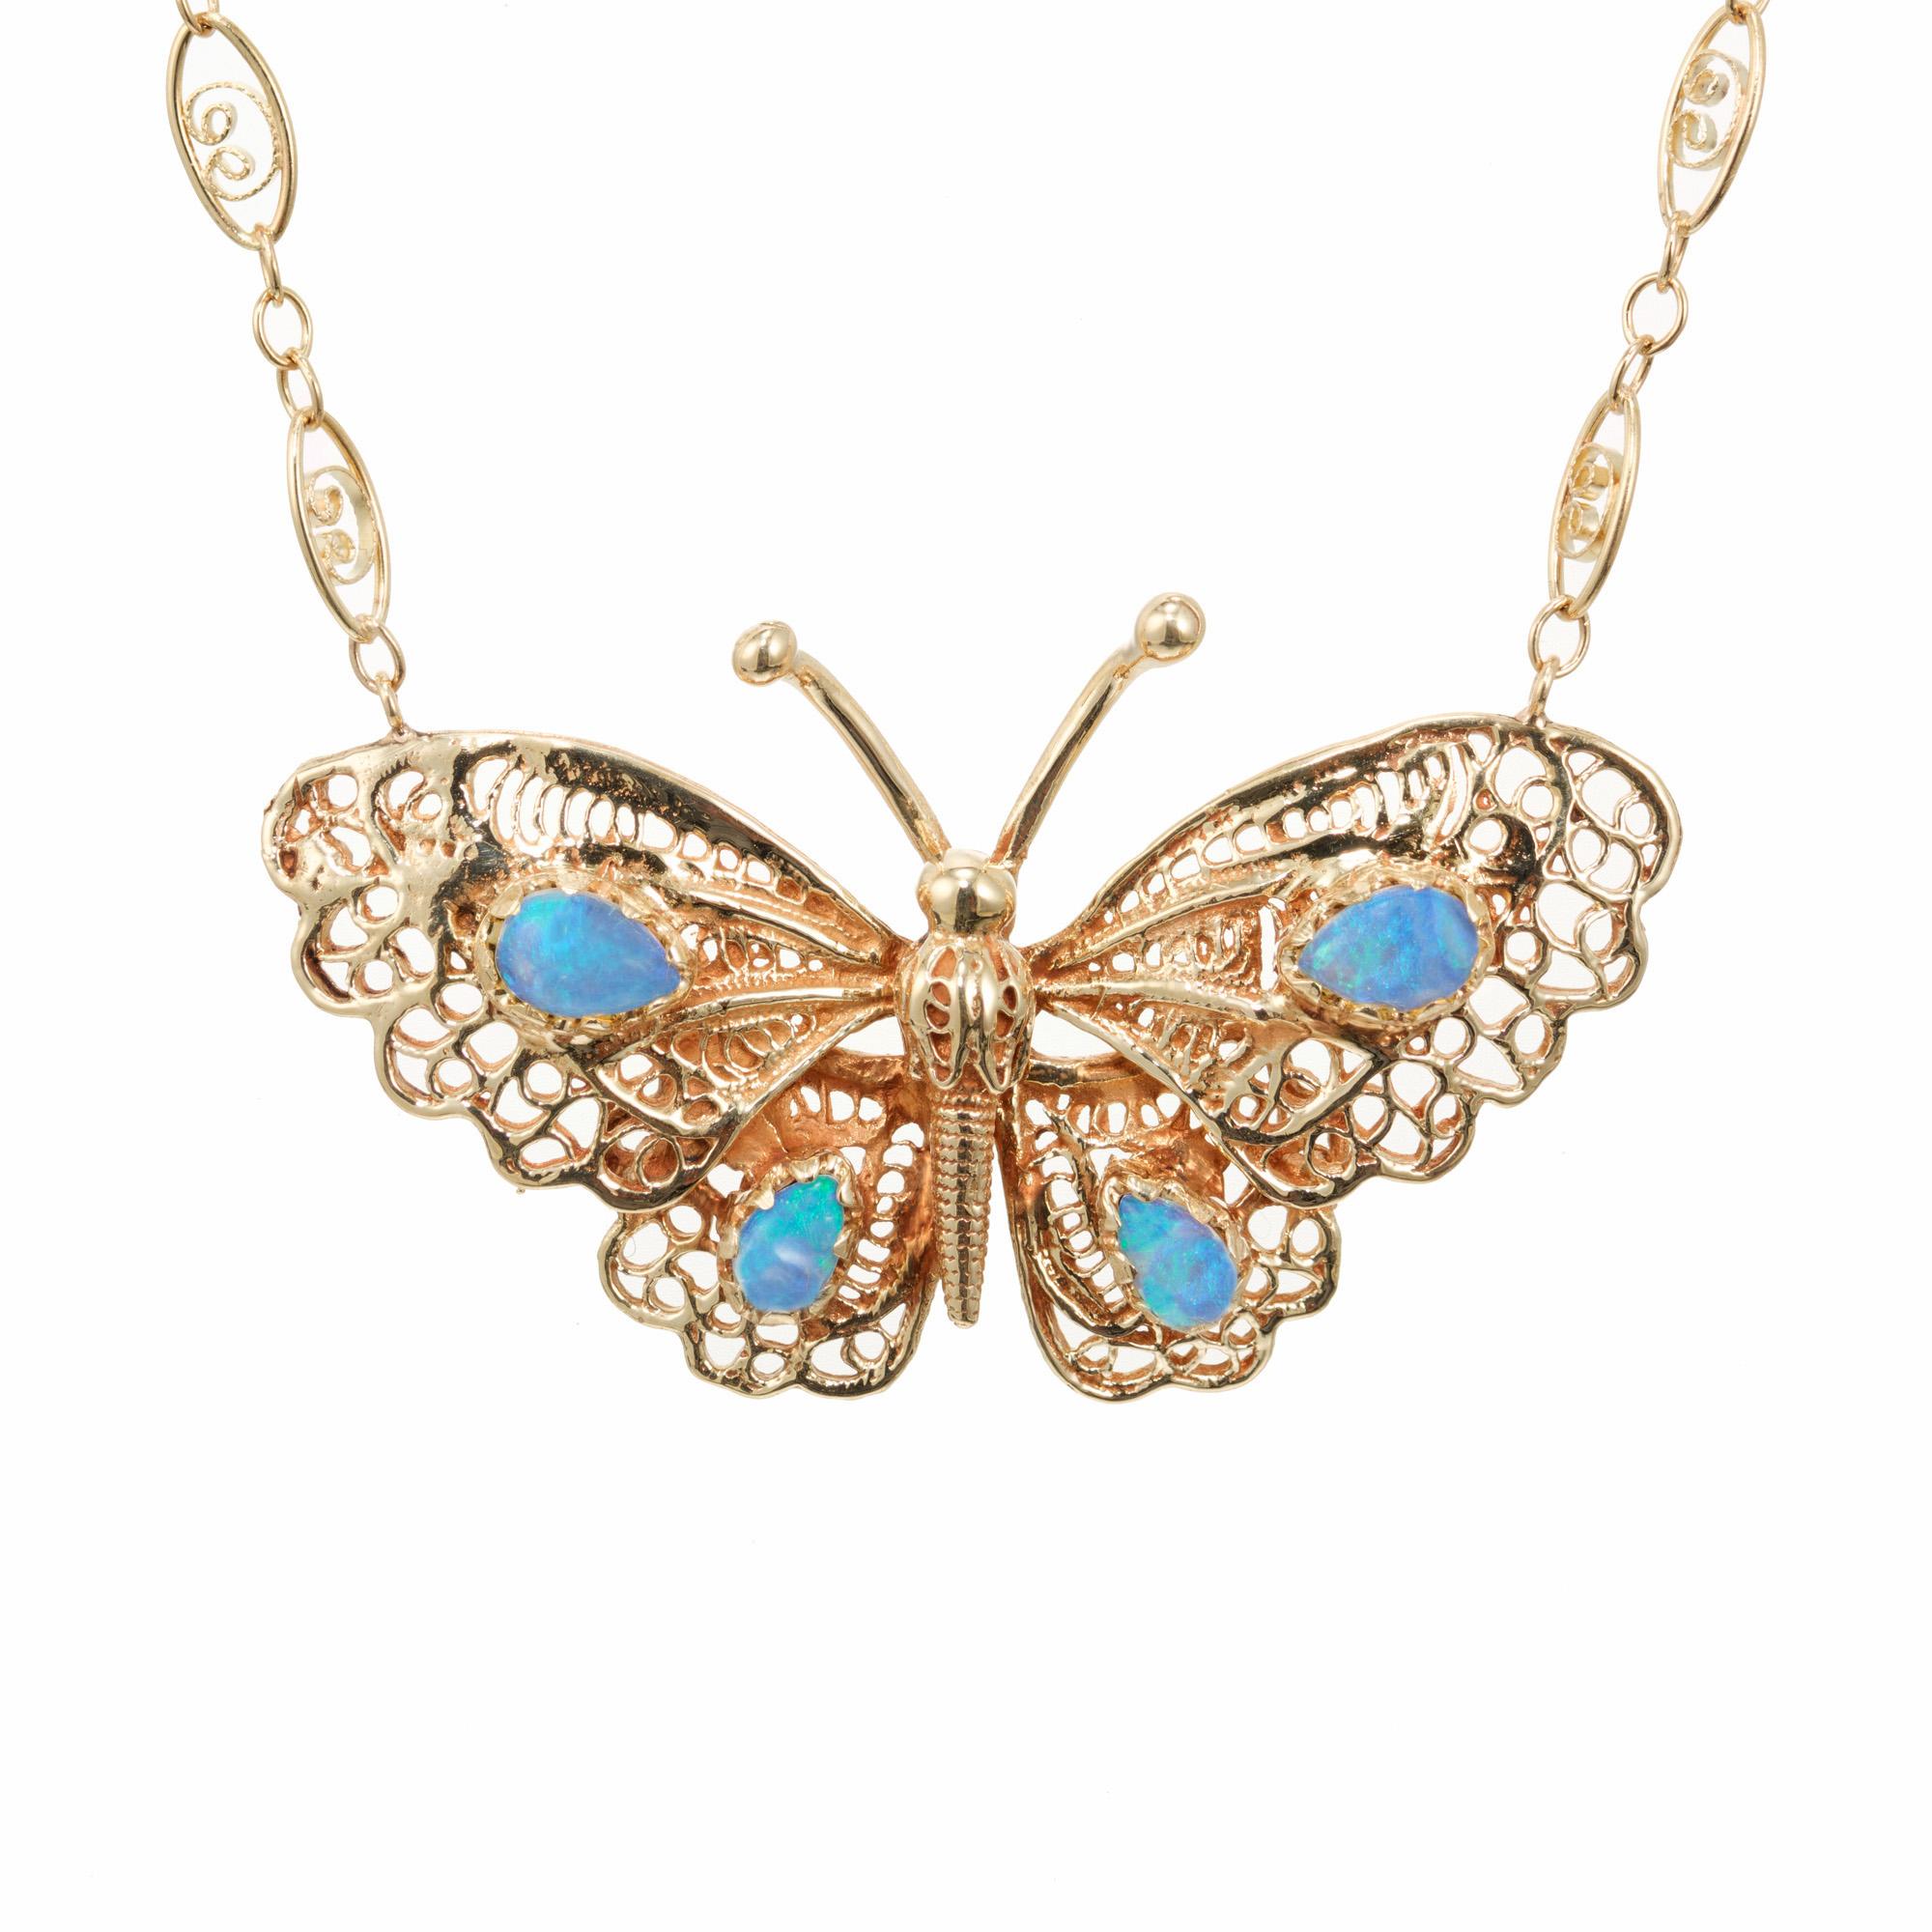 1950's mid-century Filagree opal pendant necklace. 4 pear shaped cabochon greenish/blue opals set in a 14k yellow gold filigree butterfly setting with at  19.5 inch 14k yellow gold chain. Superb example of the 1950's craftsmanship. 

4 pear shaped